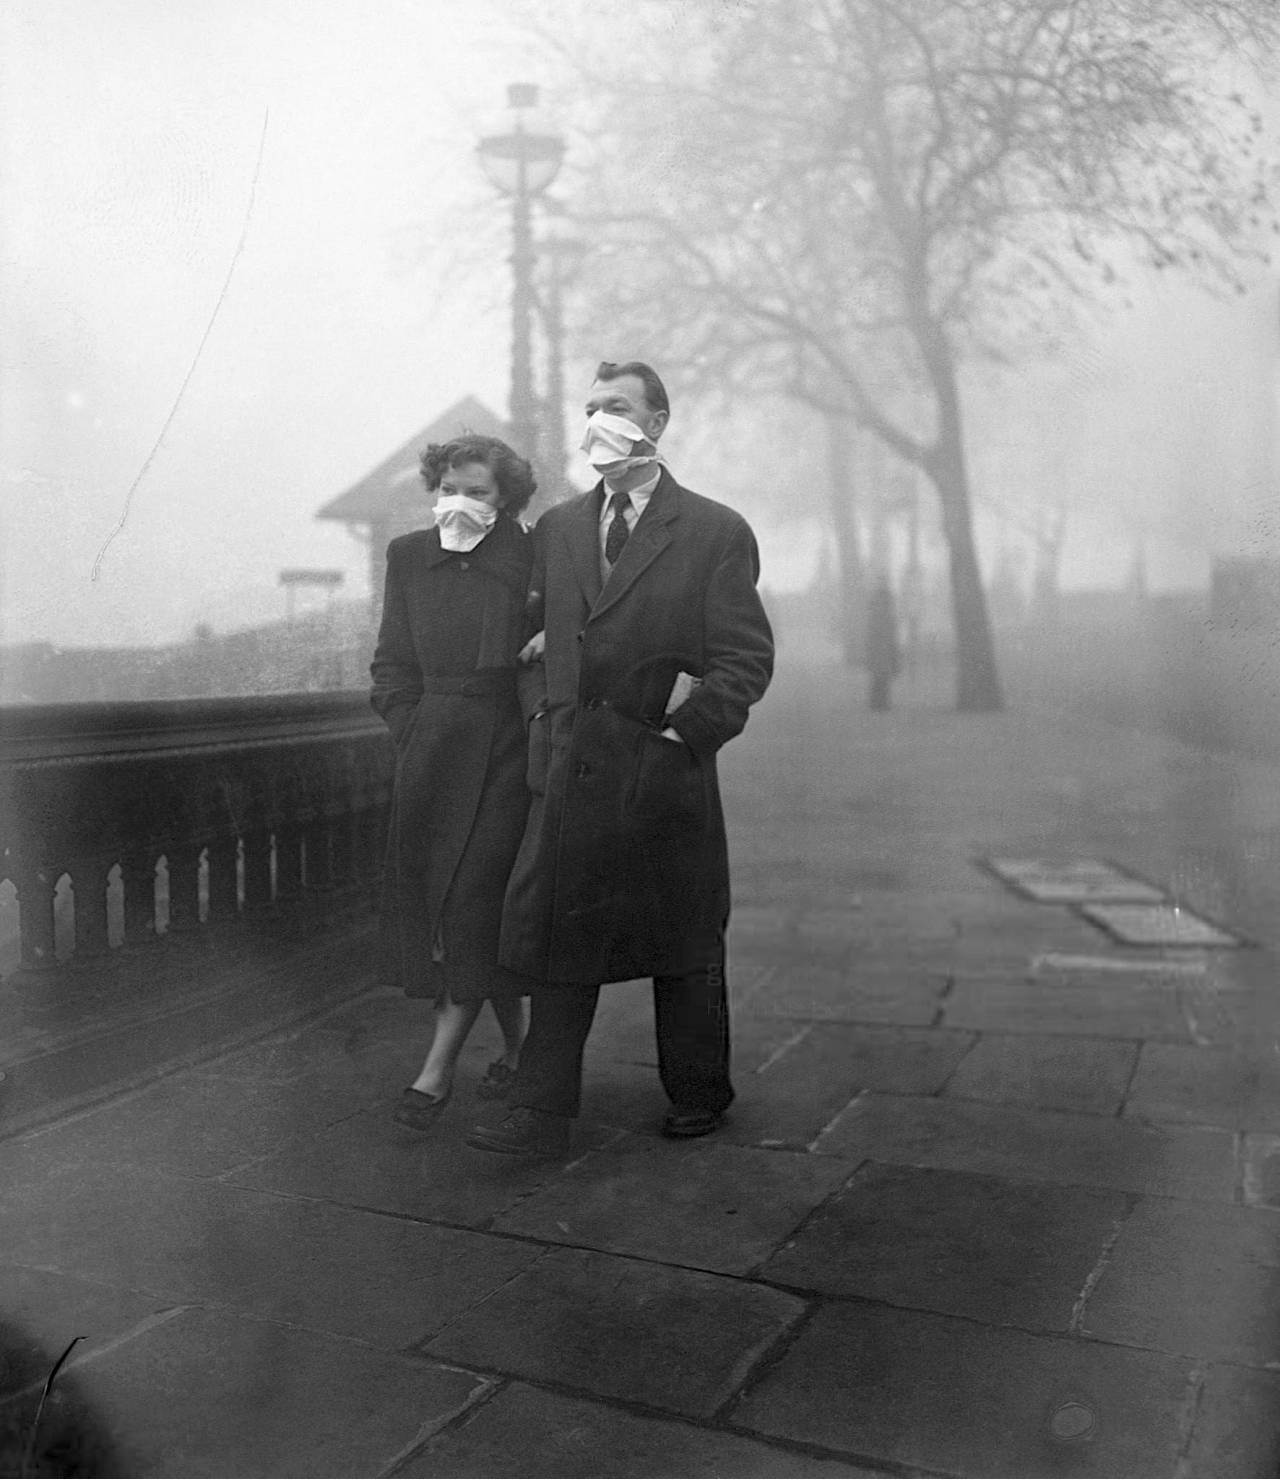 Monty Fresco. A couple wearing masks to protect them from the smog in Blackfriars, London, November 18th, 1954.